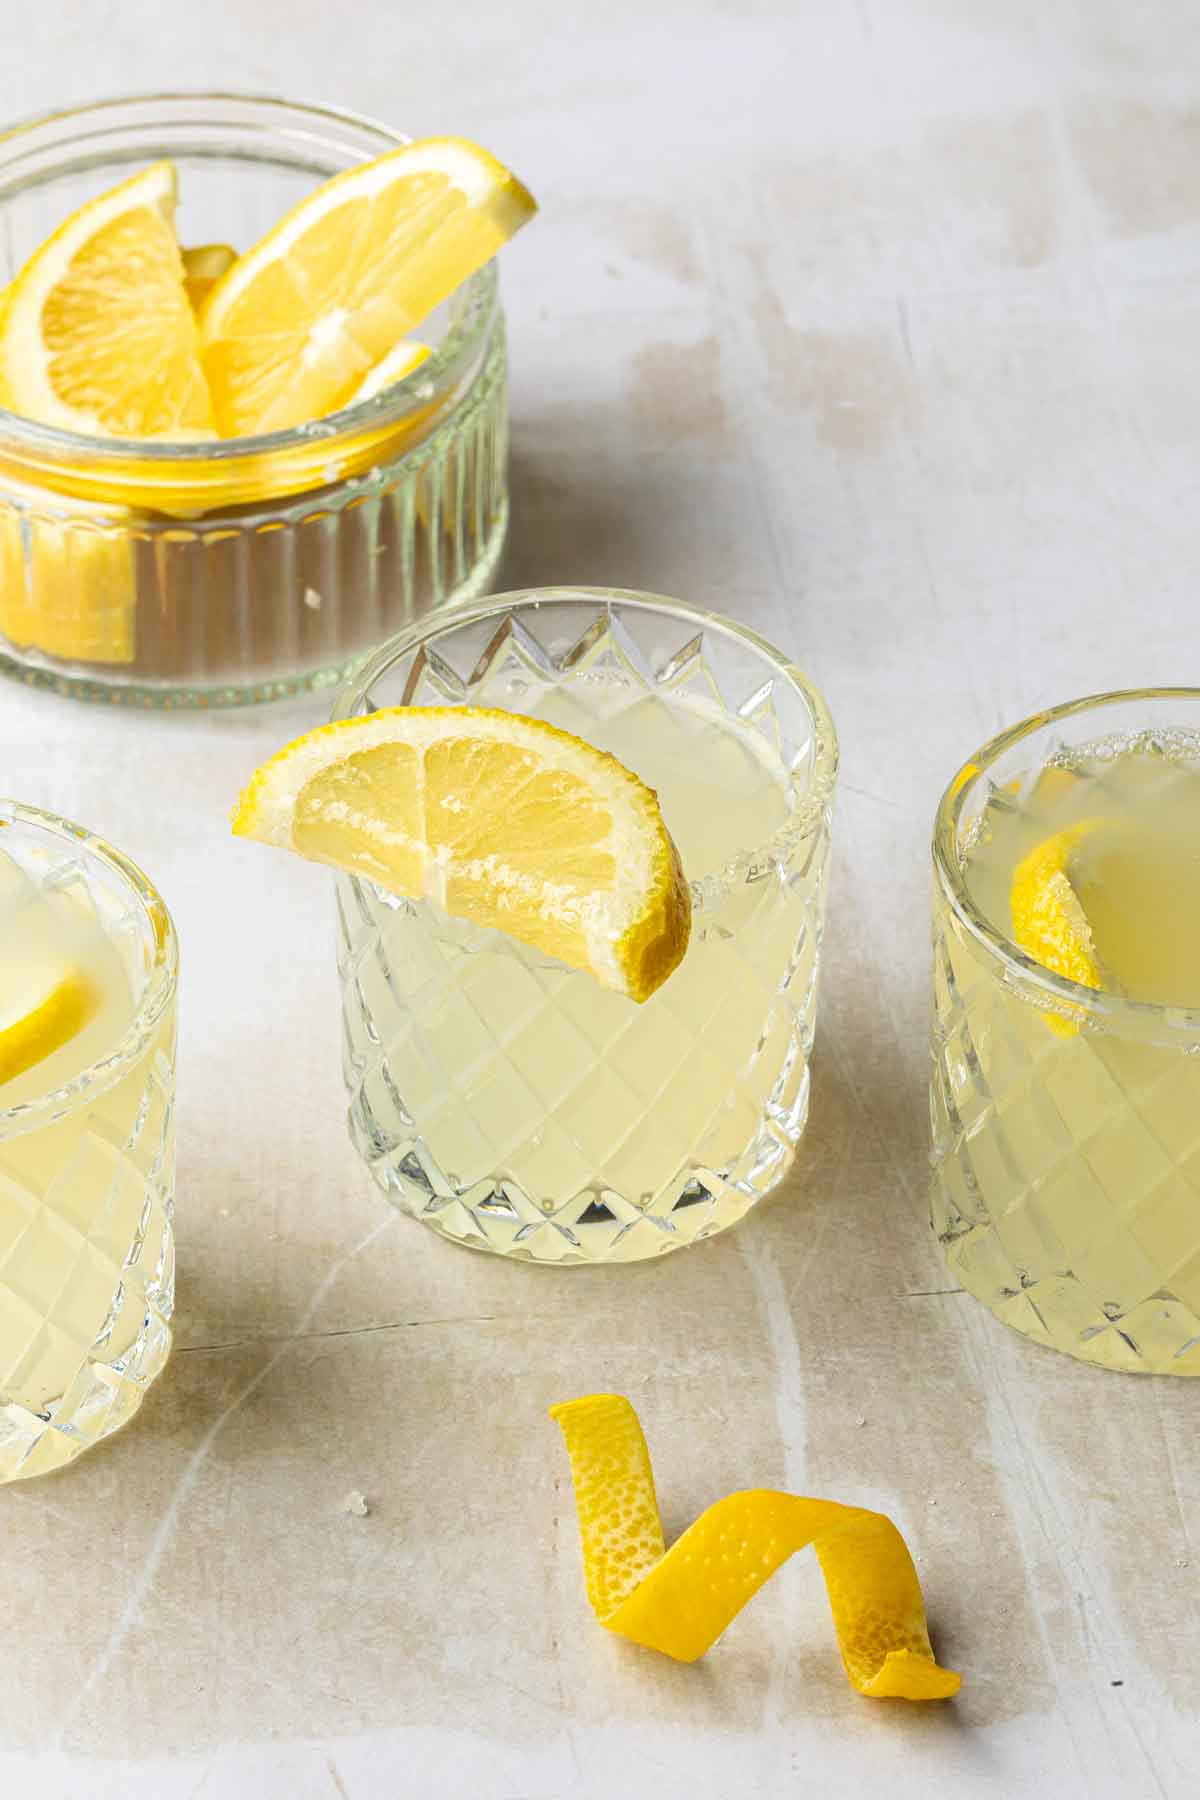 A few shot glasses full of shots with sugared lemons topping the glasses, one has a lemon in it. 